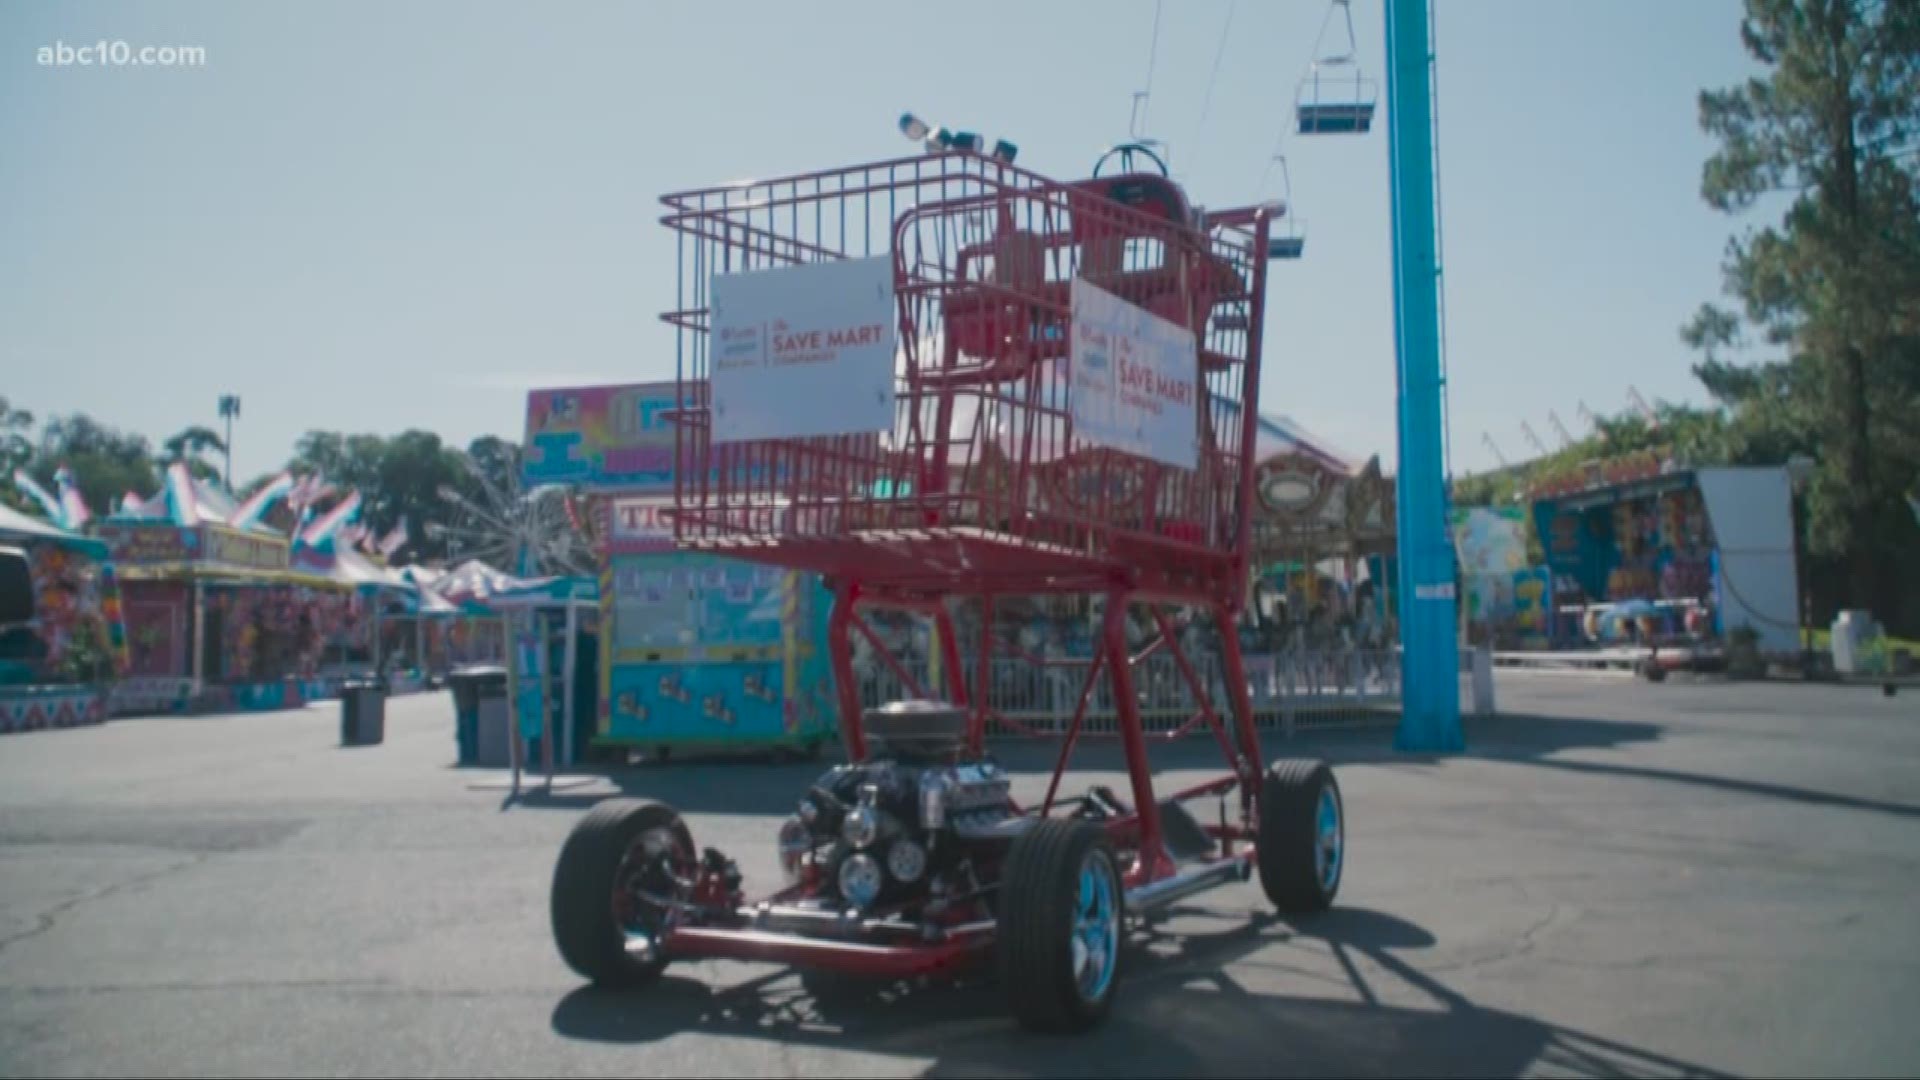 What's the story behind the big shopping cart at the California State Fair?